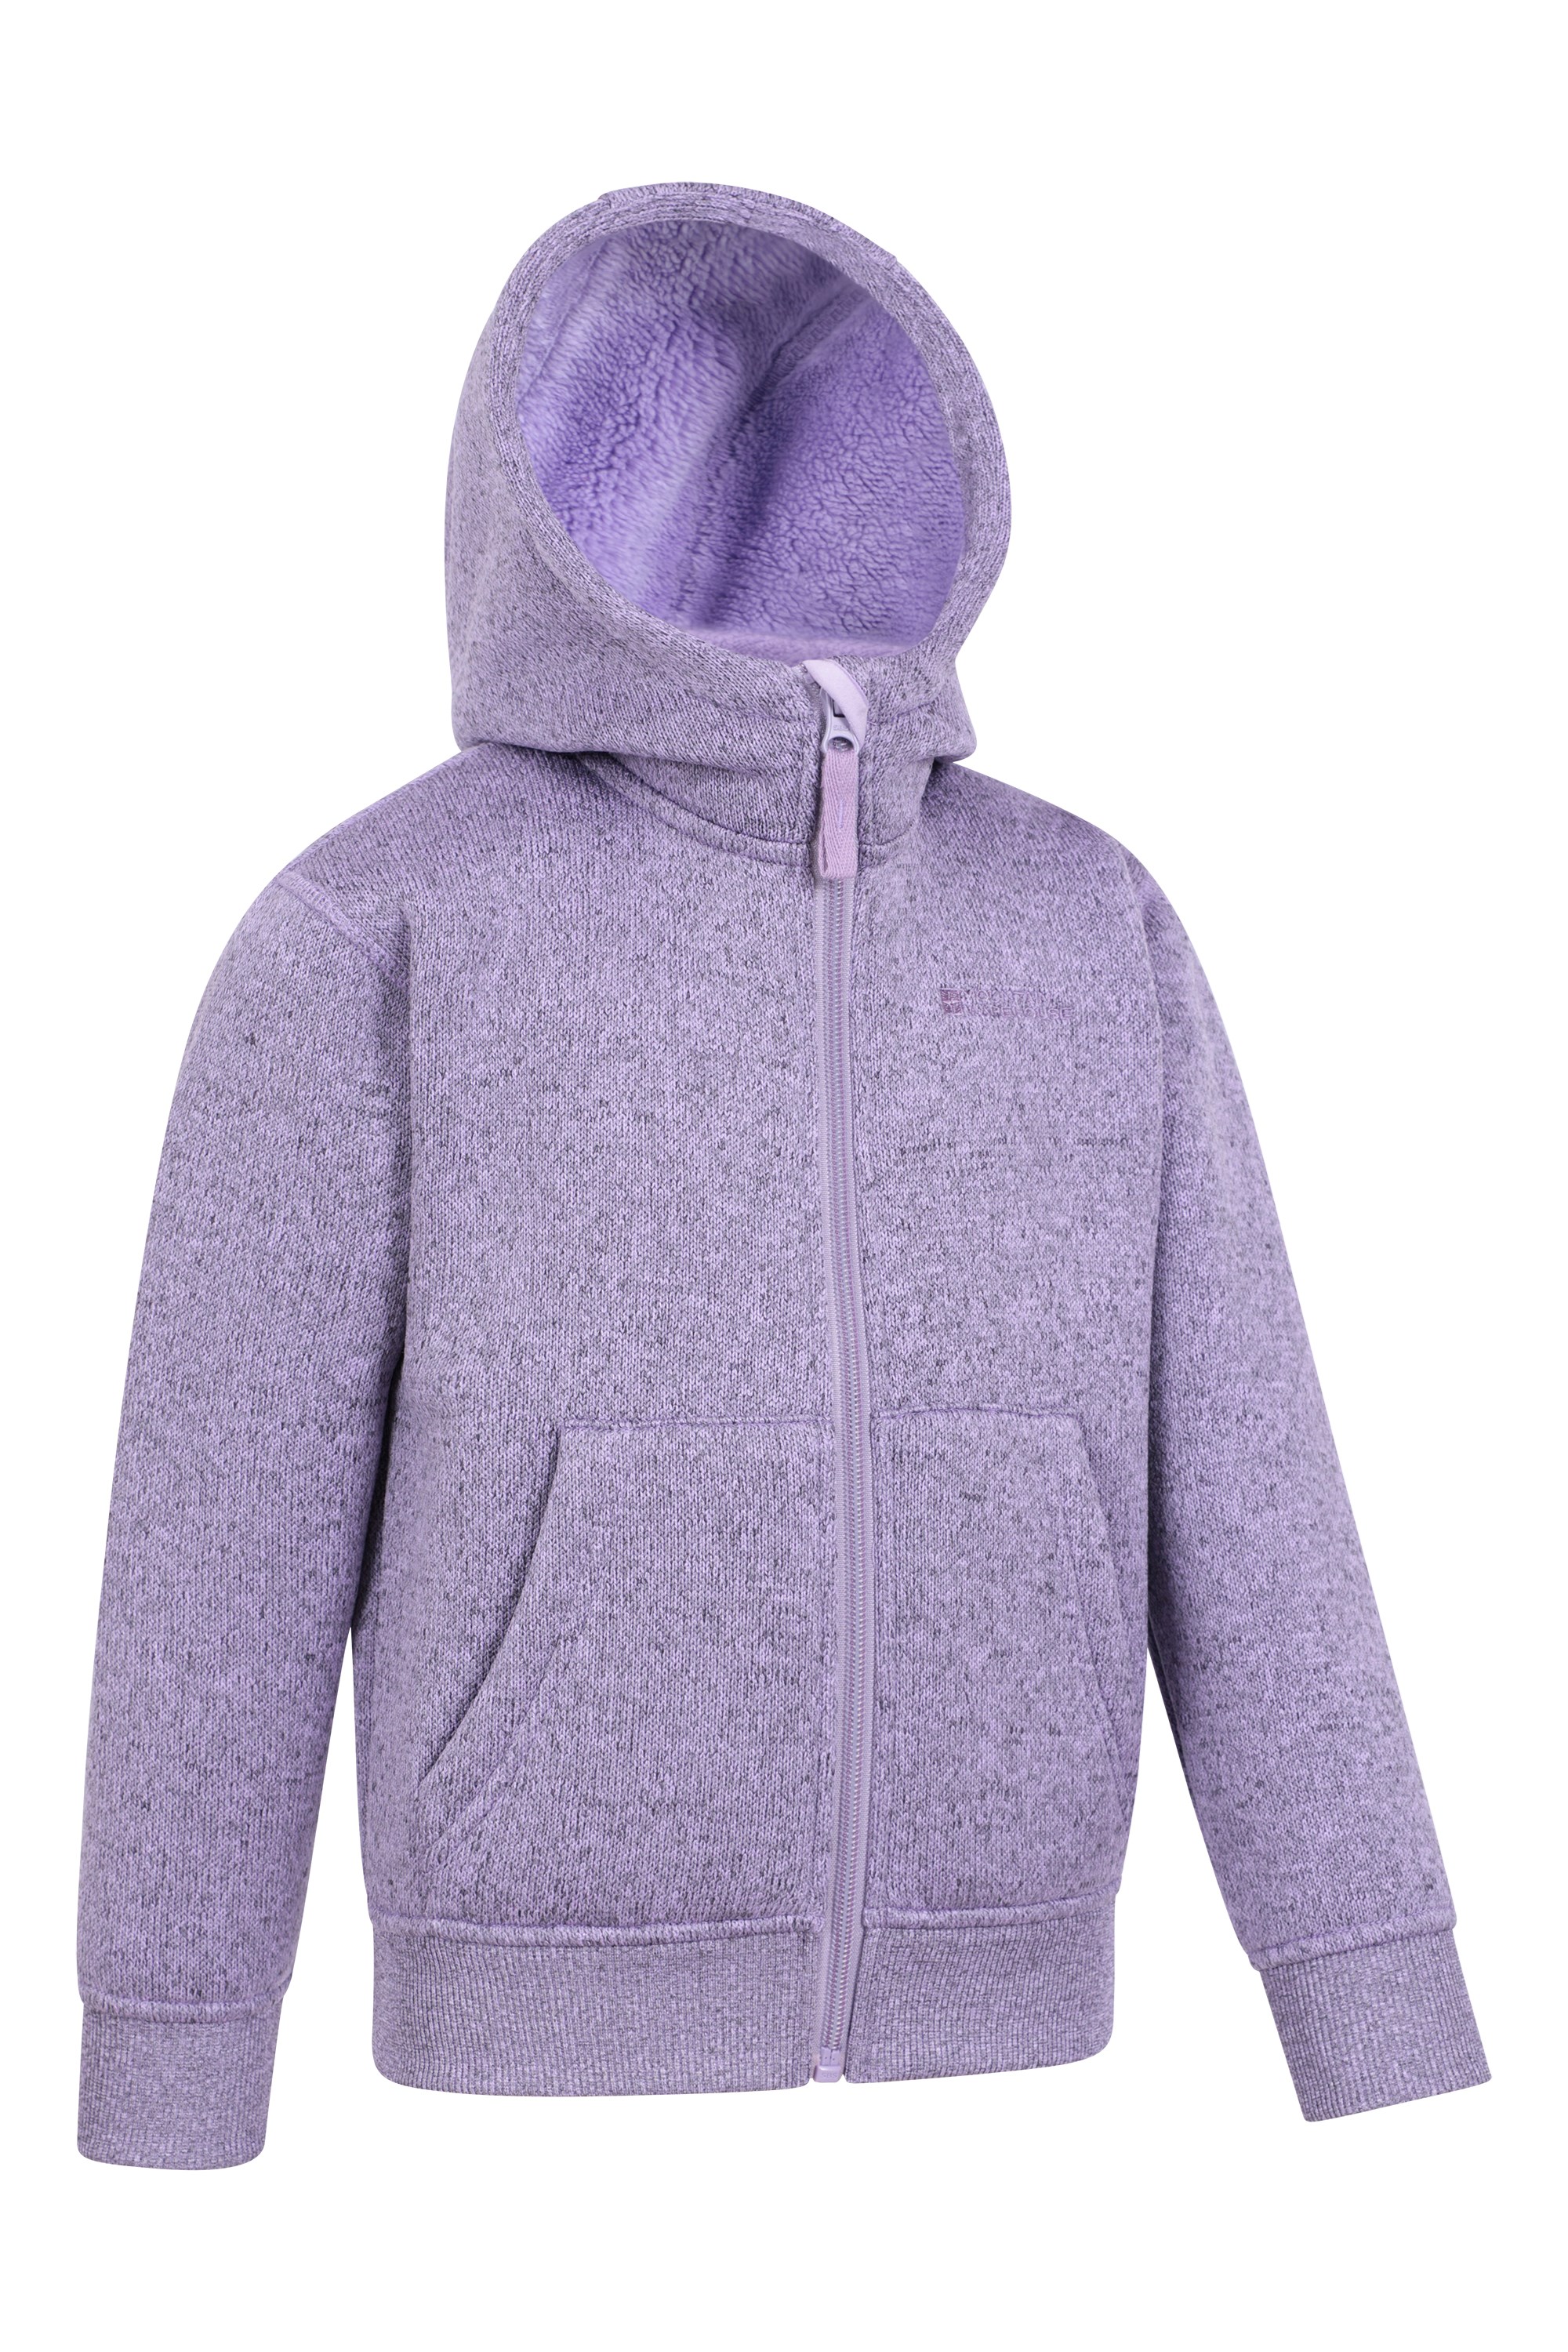 SECOOD Kids Sherpa Lined Hoodie Fleece Jacket for Fall and Winter